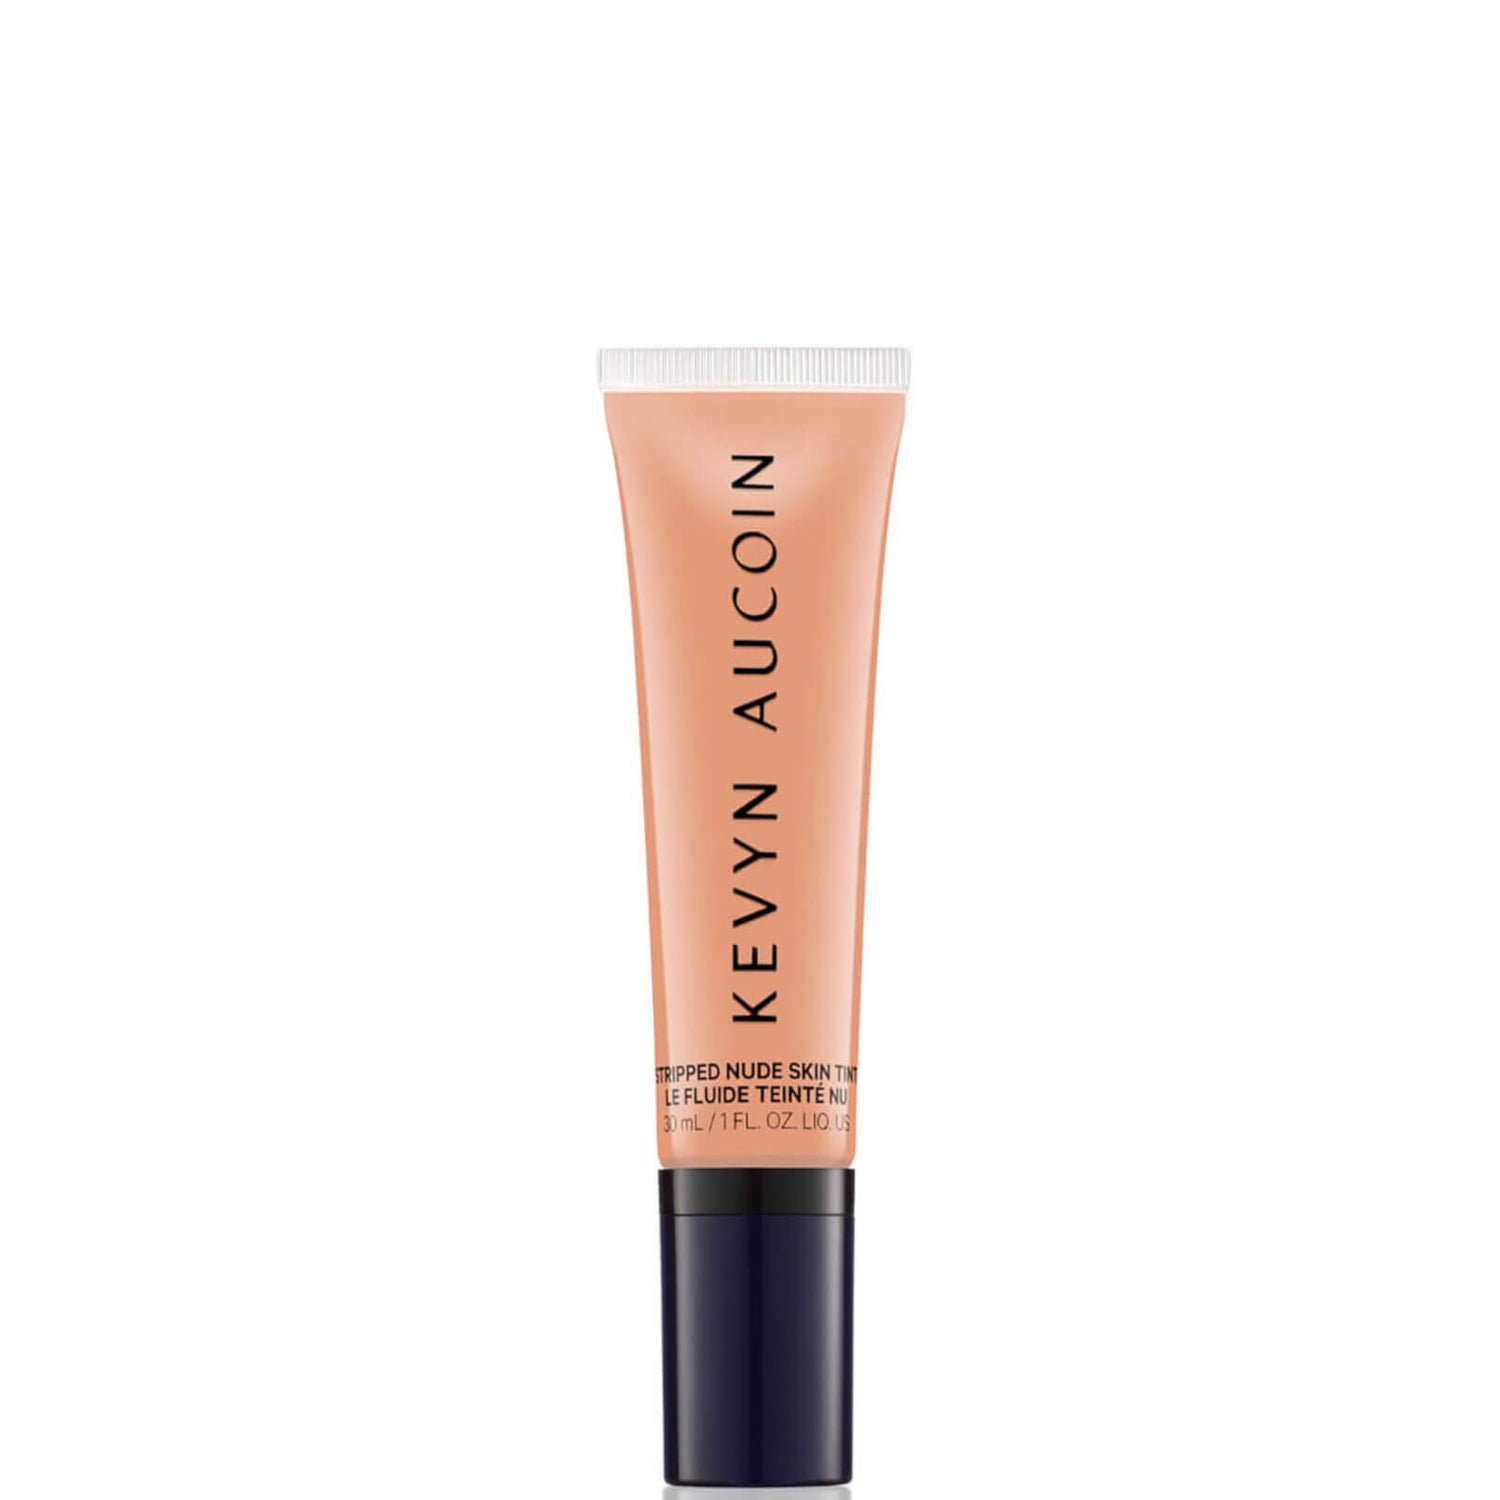 Kevyn Aucoin Stripped Nude Skin Tint Foundation 1ml (Various Shades)